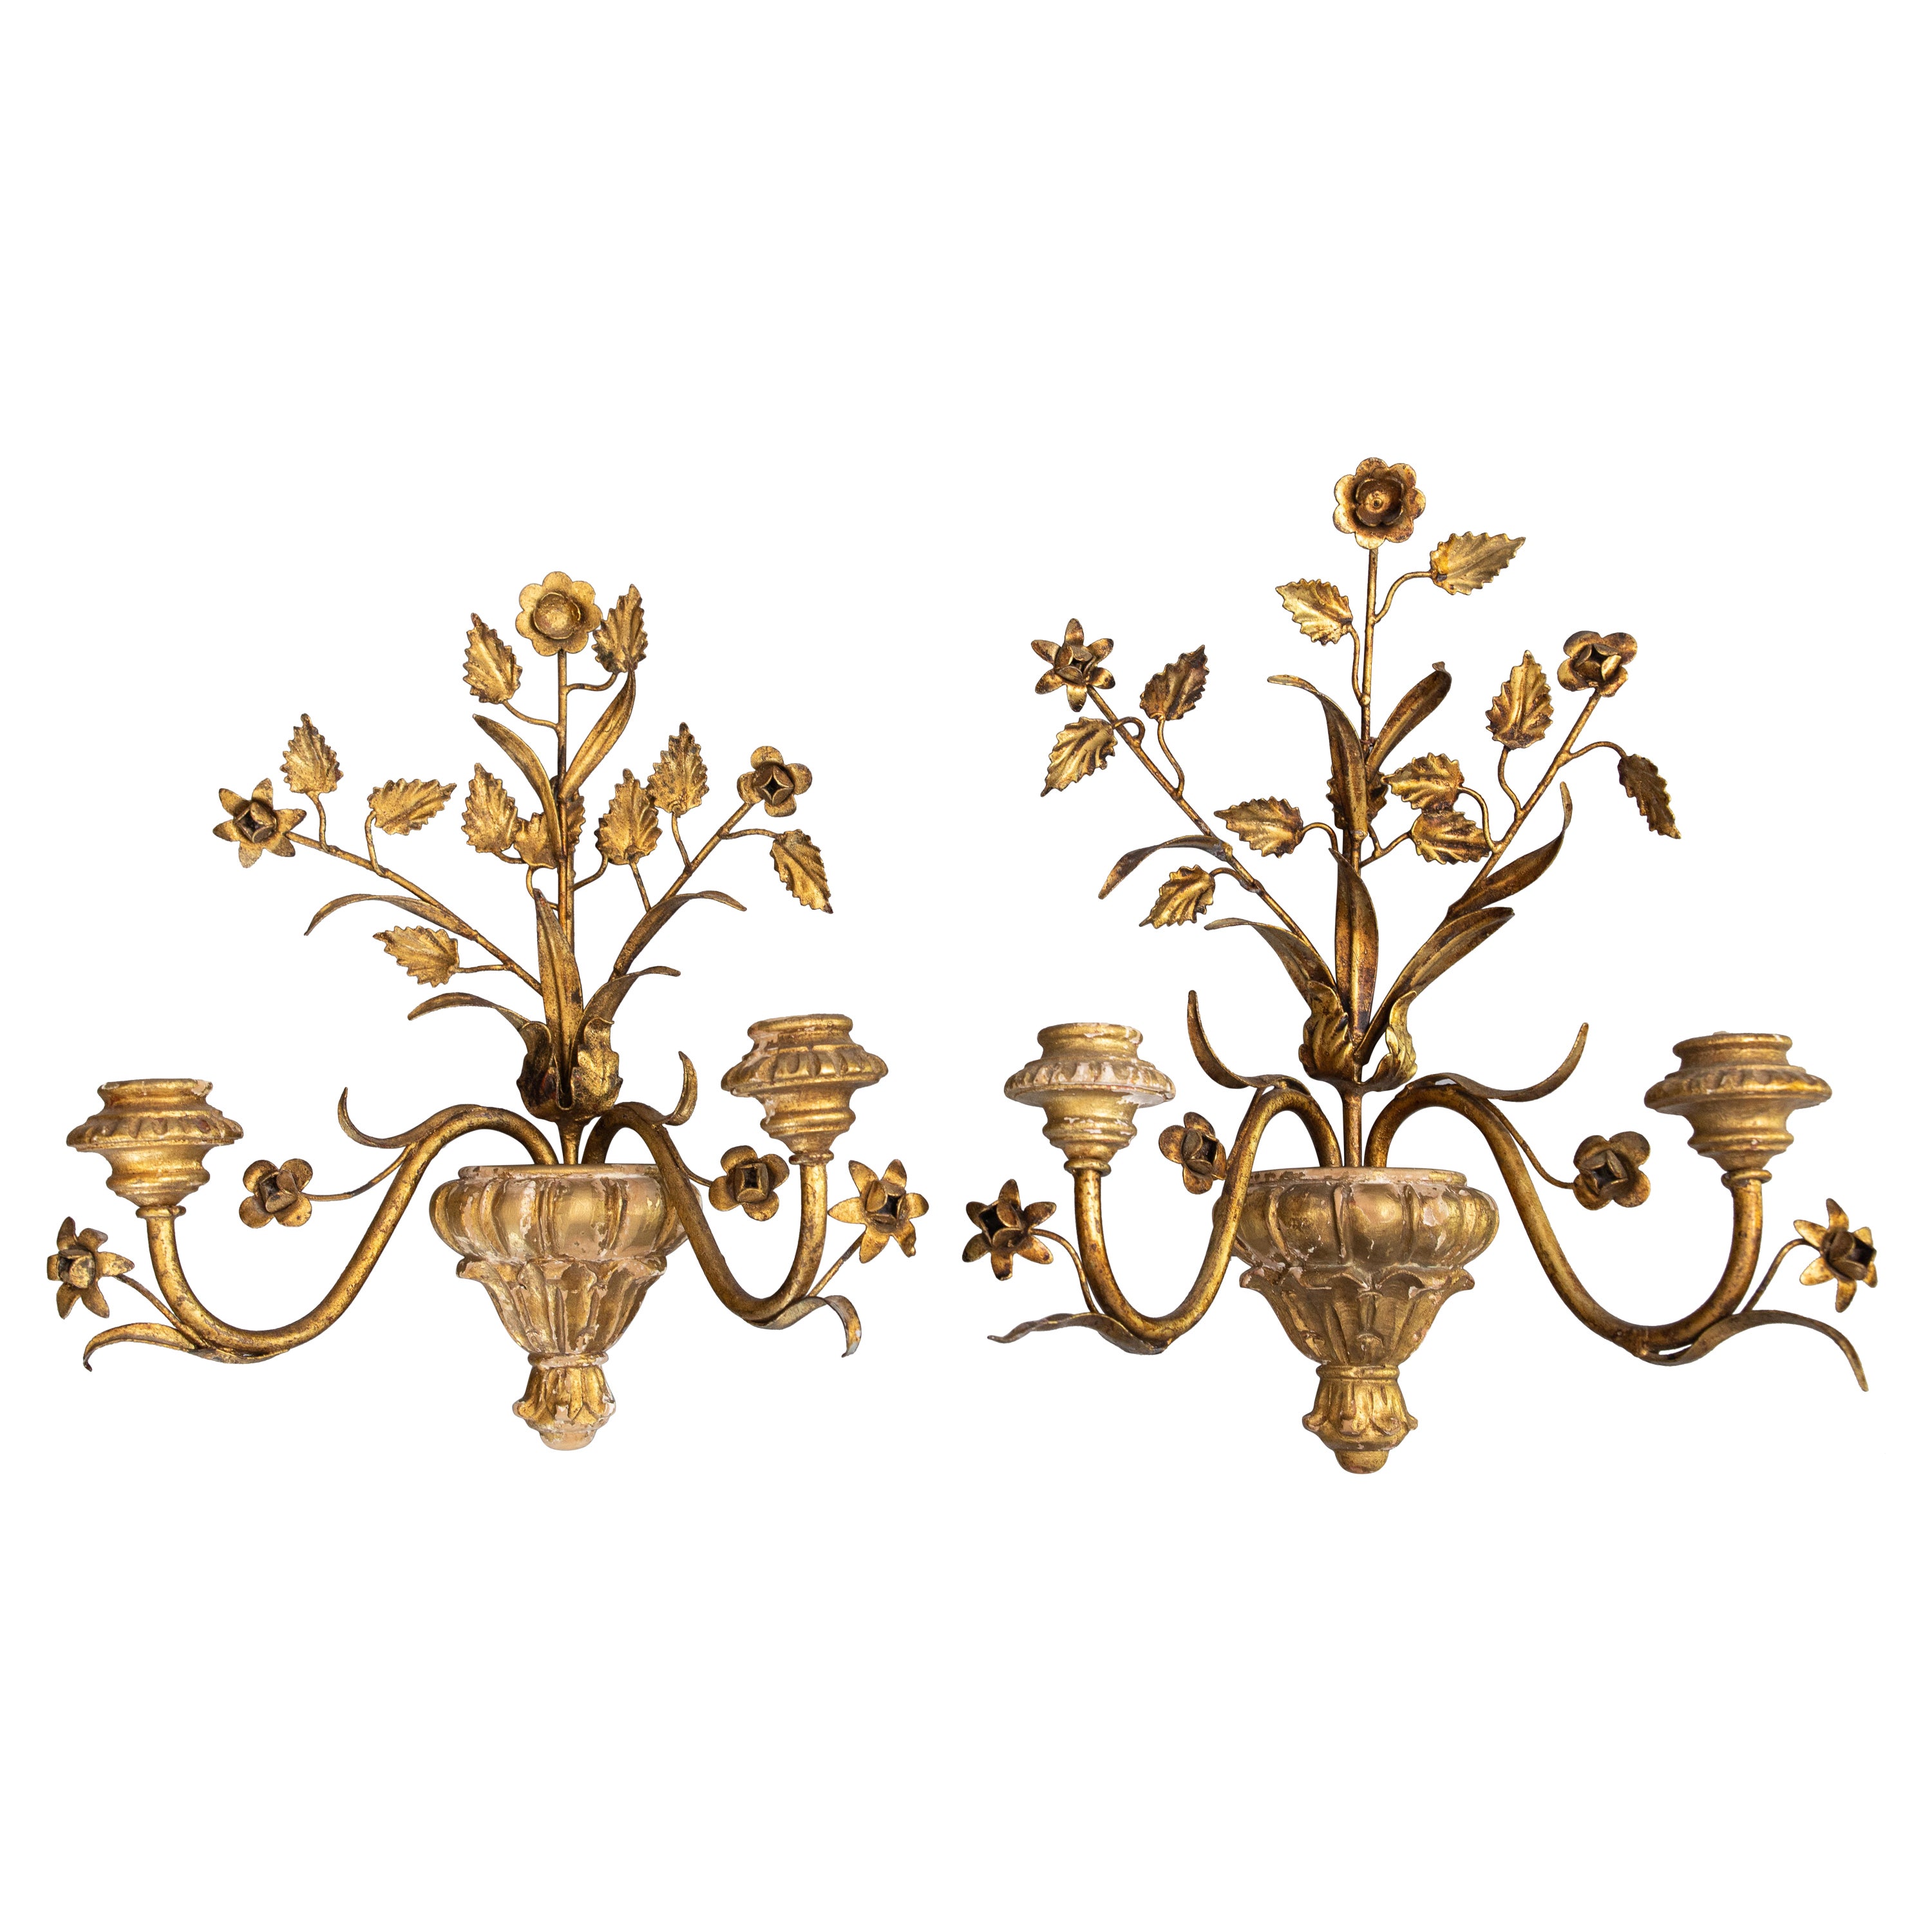 Pair of Italian Gilt Tole & Giltwood Floral Candle Wall Sconces, circa 1940